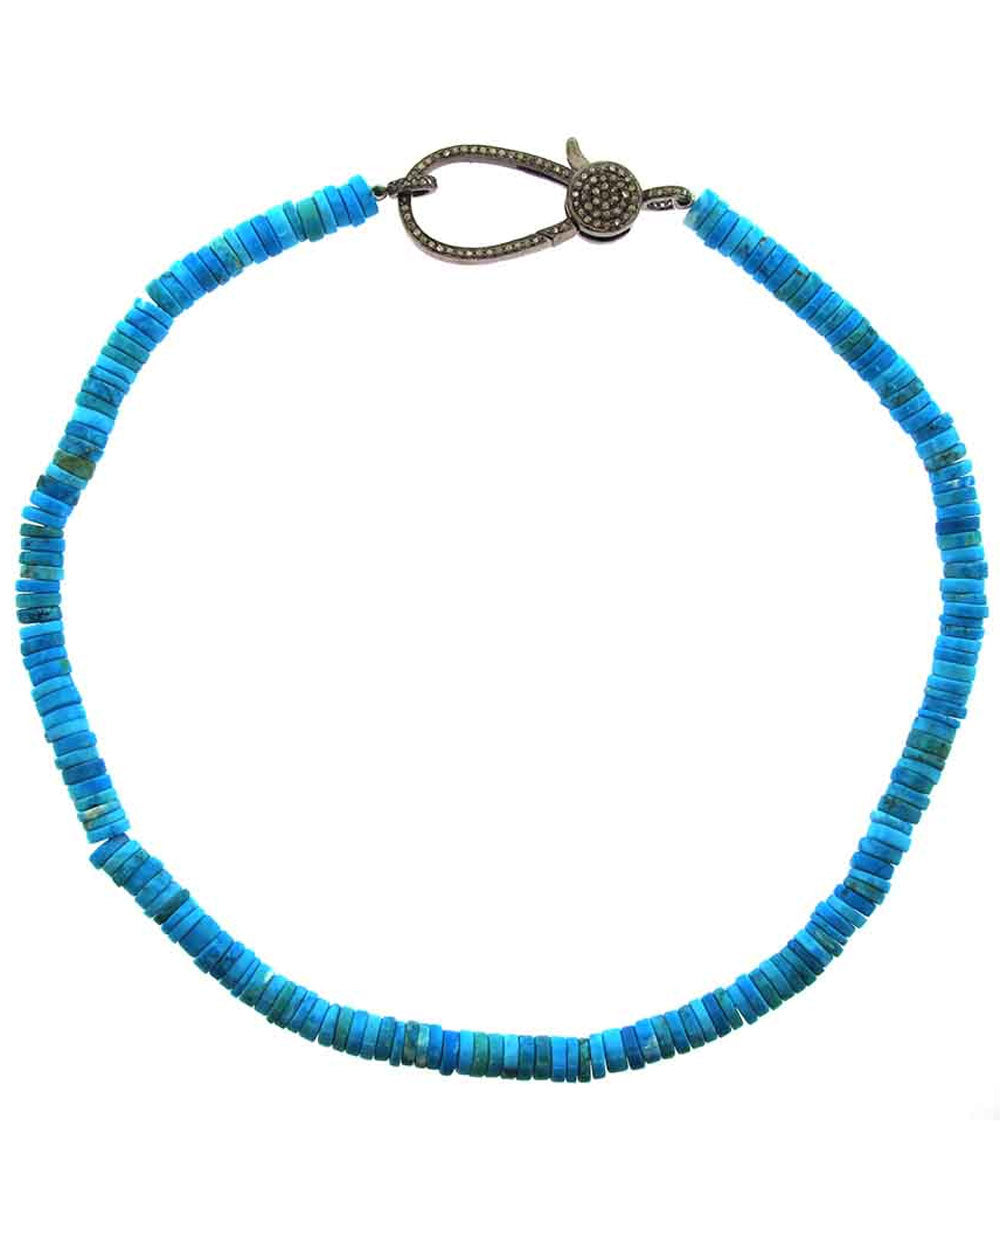 21” Diamond and Turquoise Rondelle Beaded Necklace